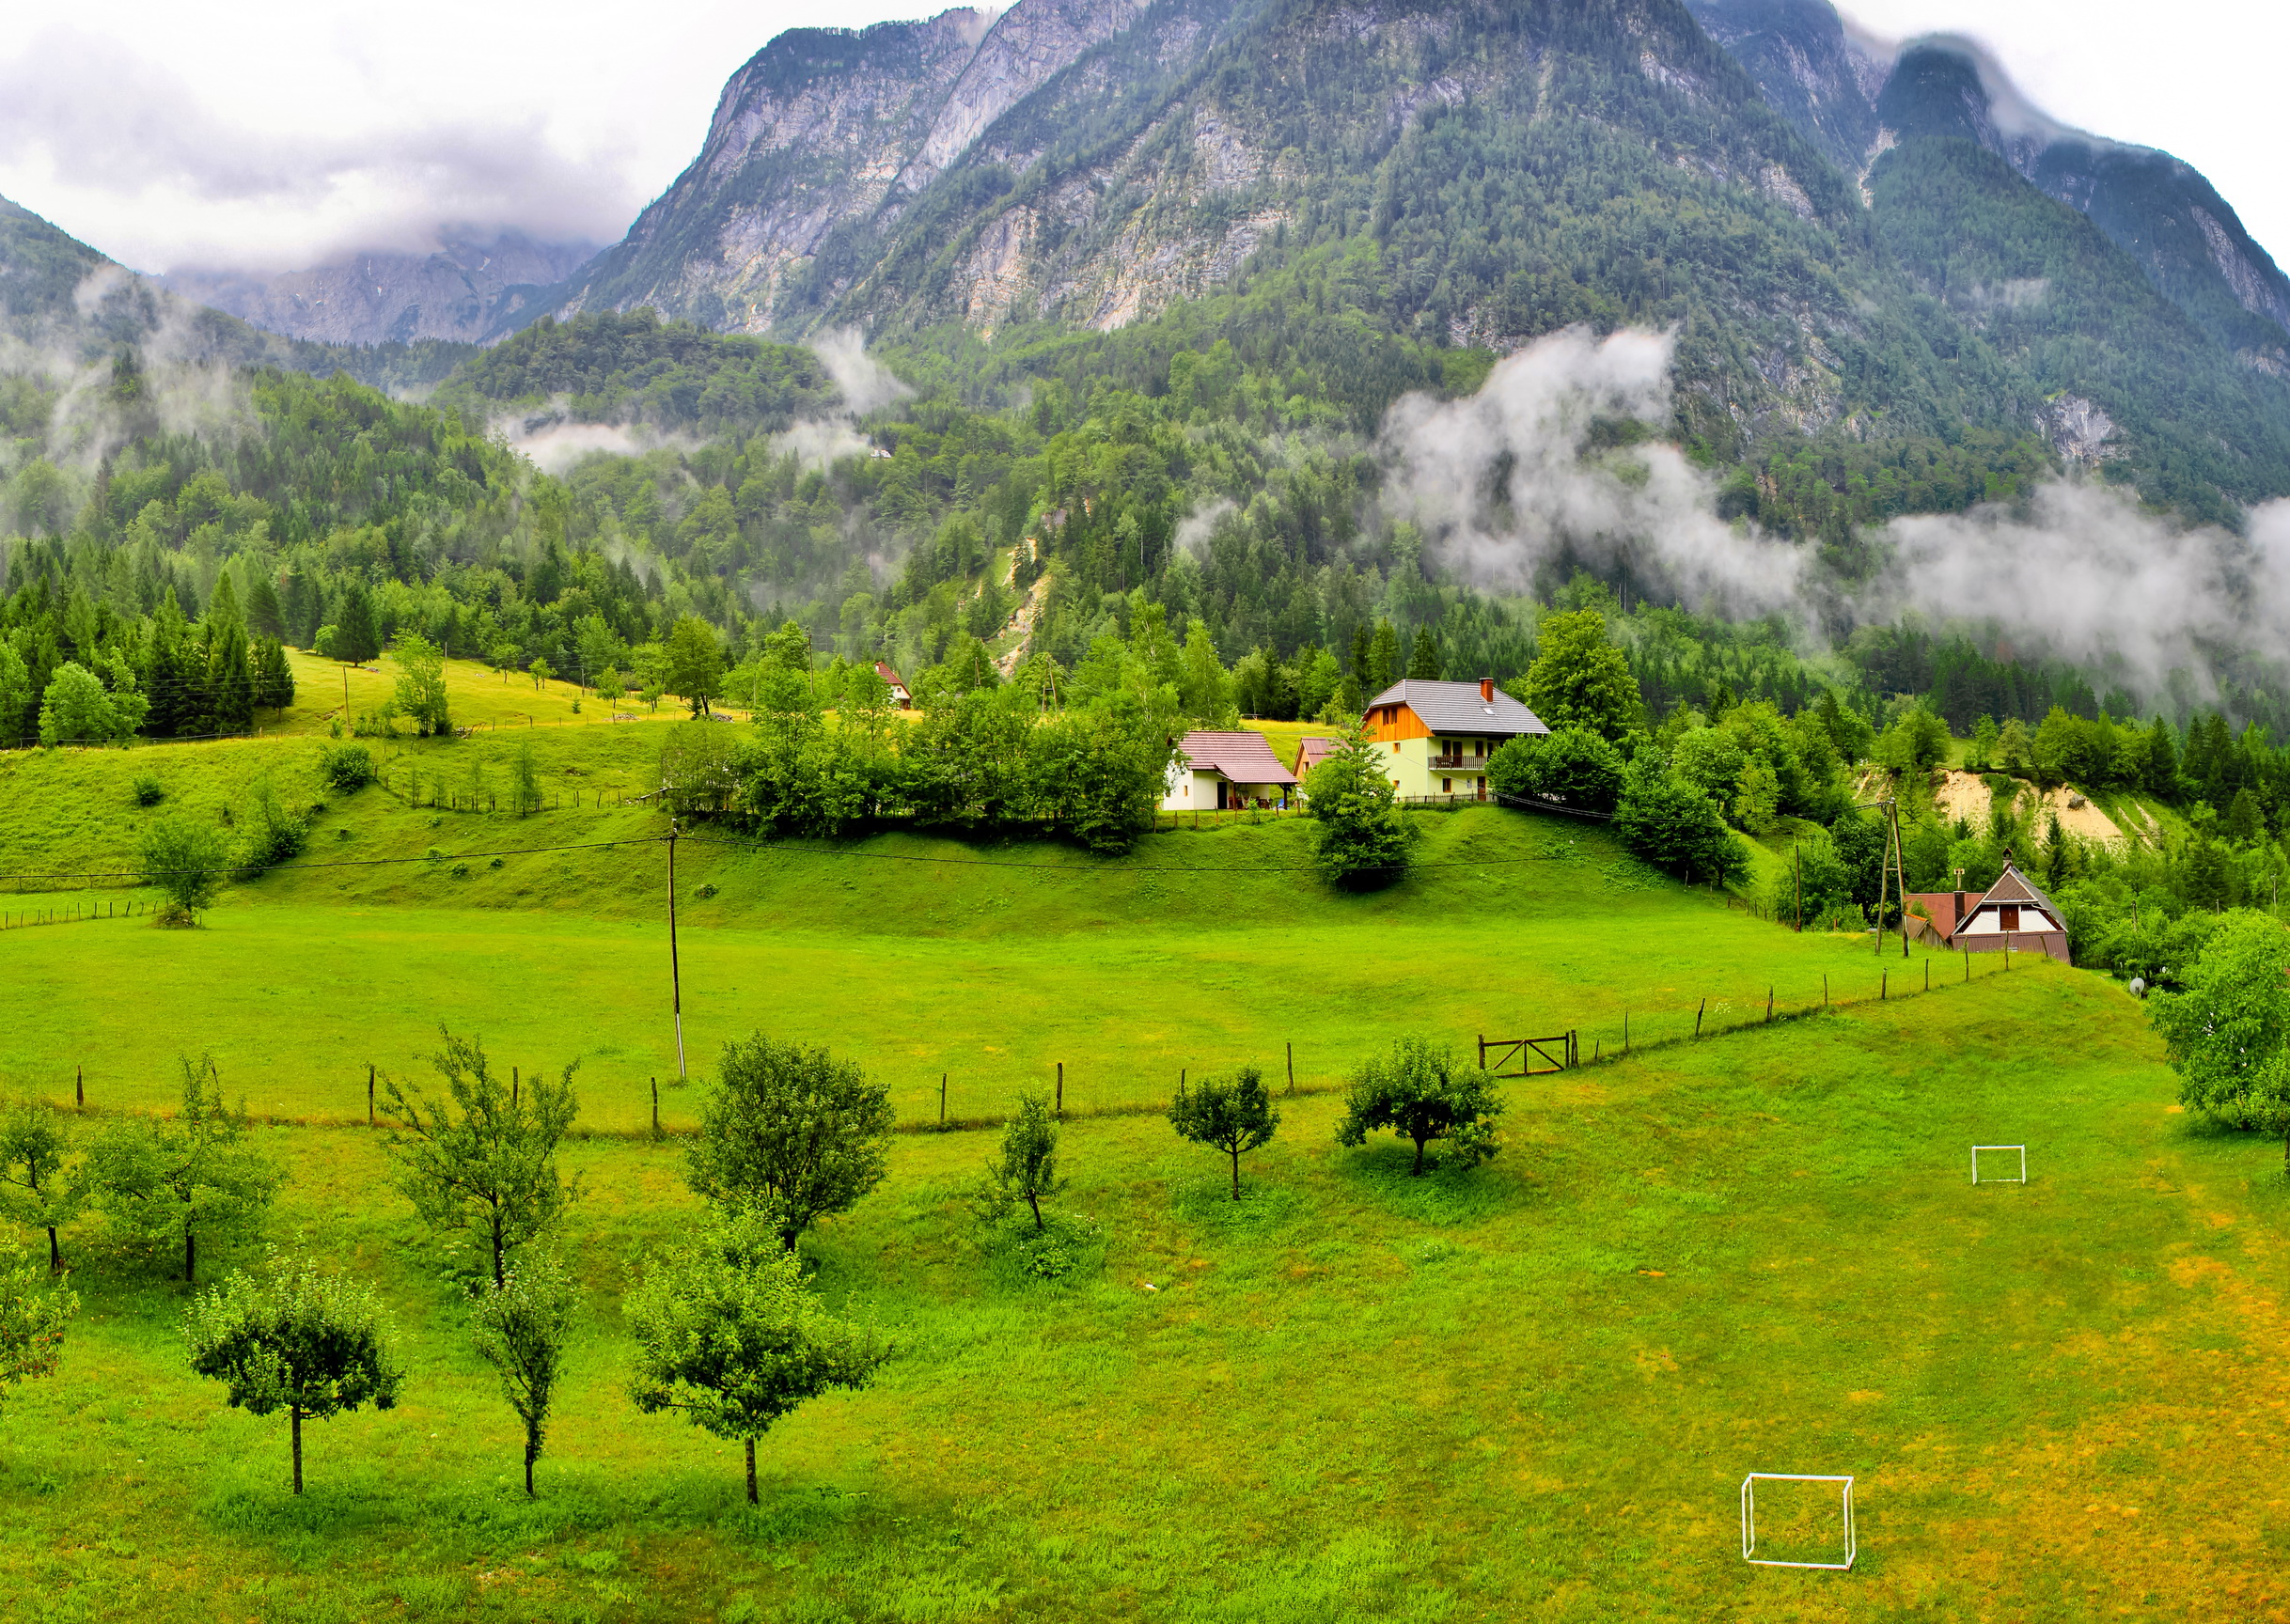 bovec, Slovenia, Mountains, Grass, Nature, Landscapes, Fields, Grass, Trees, Forest, Mountains, Fog, Clouds, Woods, Fence, Rustic, Farm, Architecture, Buildings, Houses Wallpaper